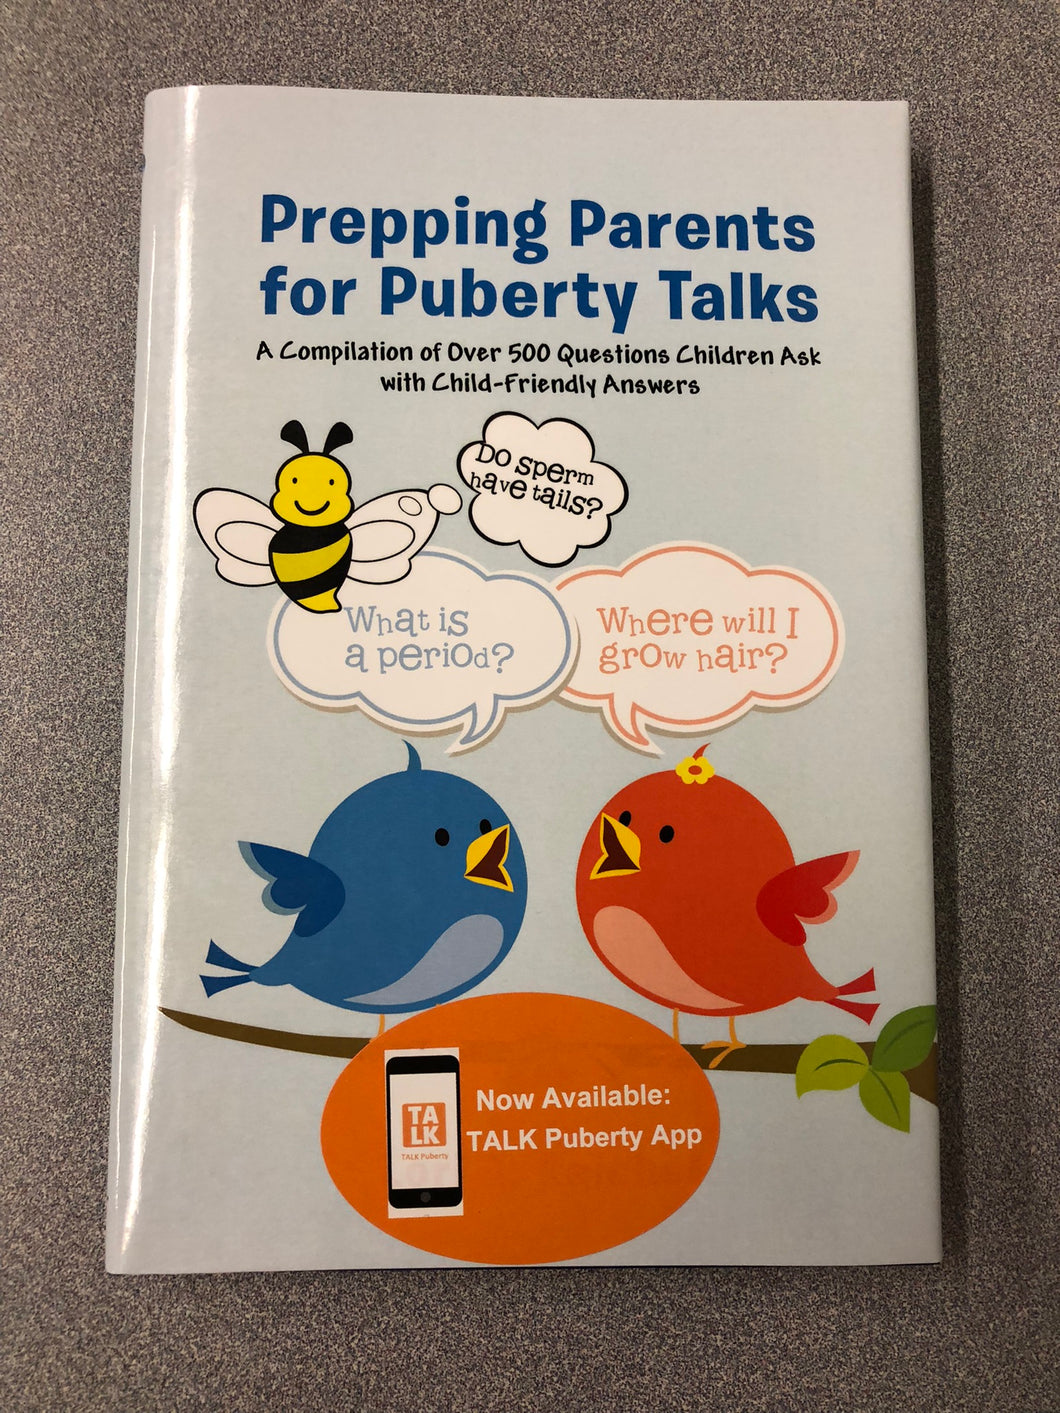 Prepping Parents for Puberty Talks: a Compilation of Over 500 Questions Children Ask with Child-Friendly Answers, Reichel, Lori, A [2015] EM 7/22